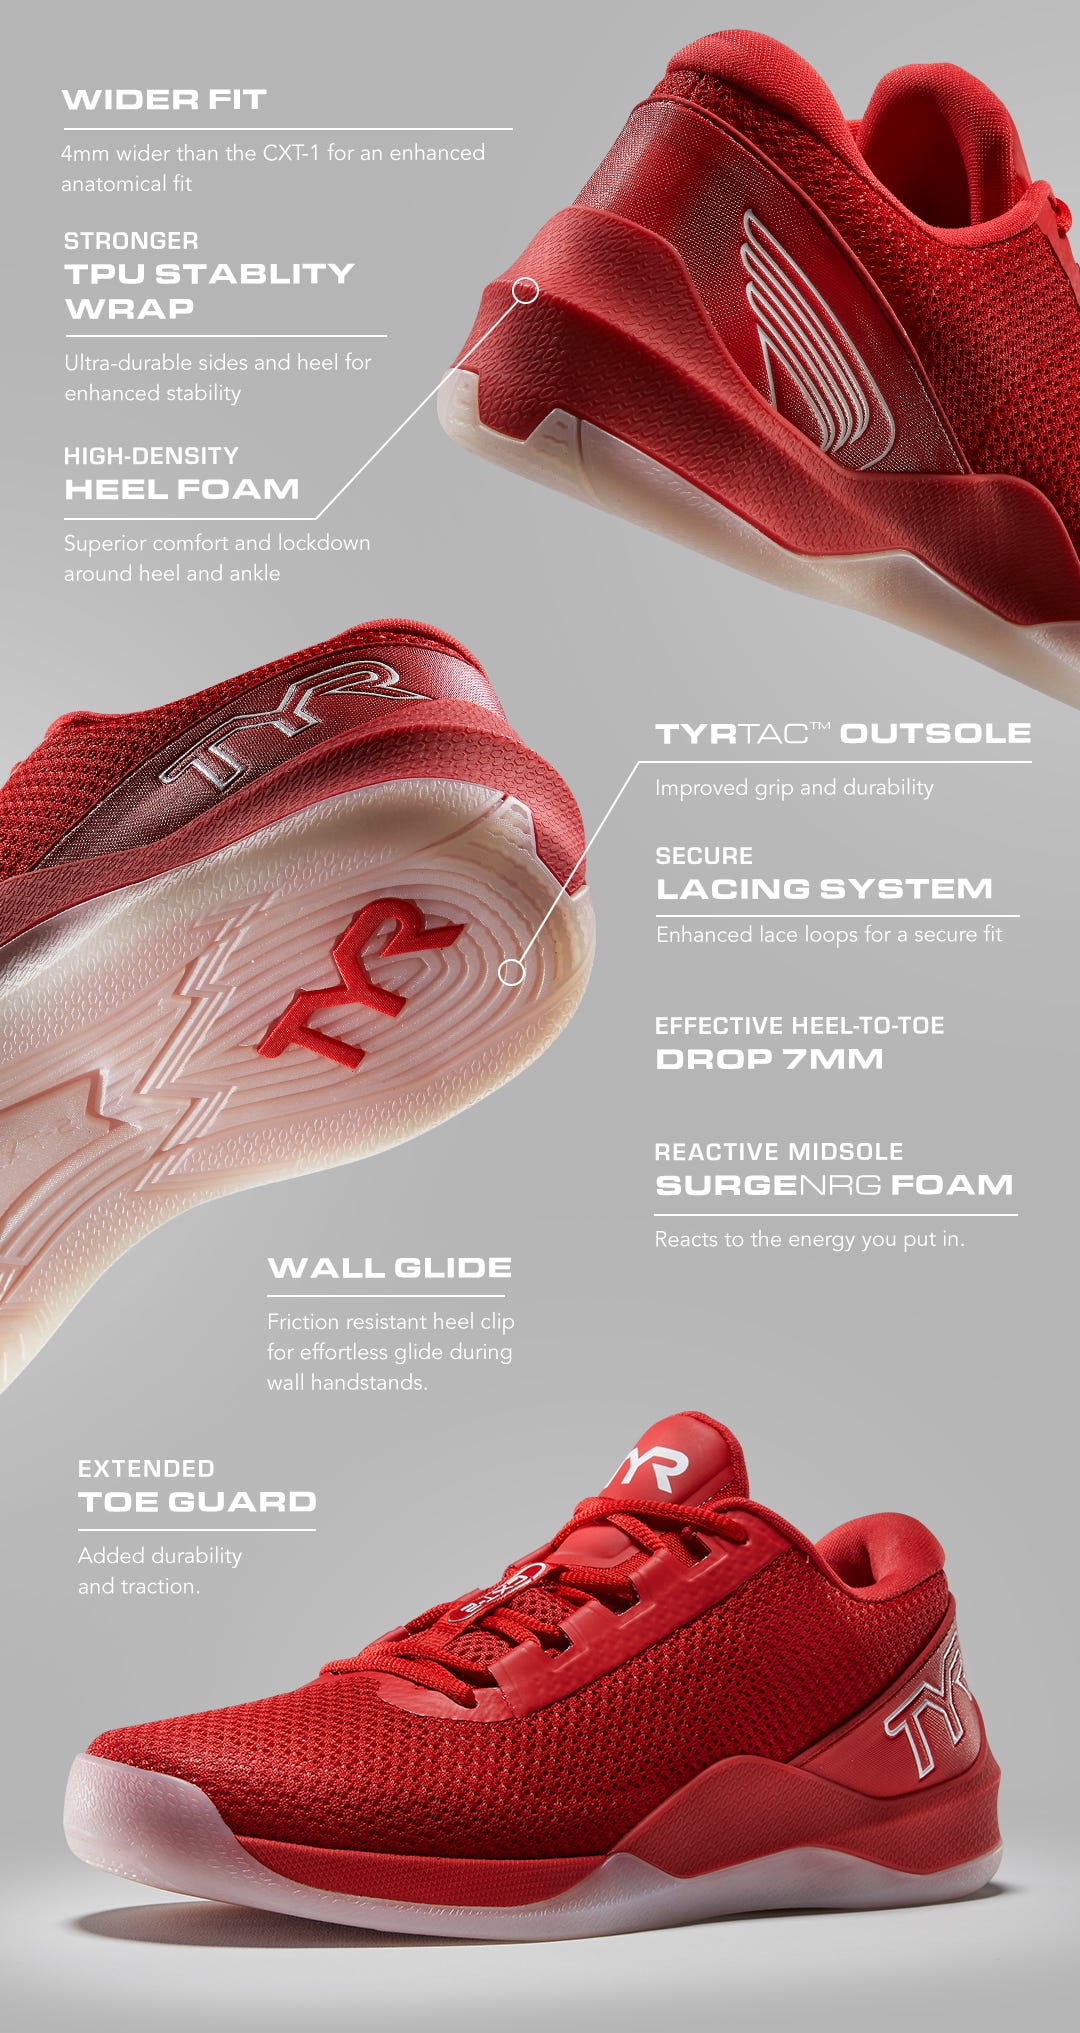 WIDER FIT: 4mm wider than the CXT-1 for an enhanced anatomical fit STRONGER TPU STABILITY WRAP: Ultra-durable sides and heel for enhanced stability HIGH-DENSITY HEEL FOAM: Superior comfort and lockdown around heel and ankle TYRTAC™ OUTSOLE: Improved grip 